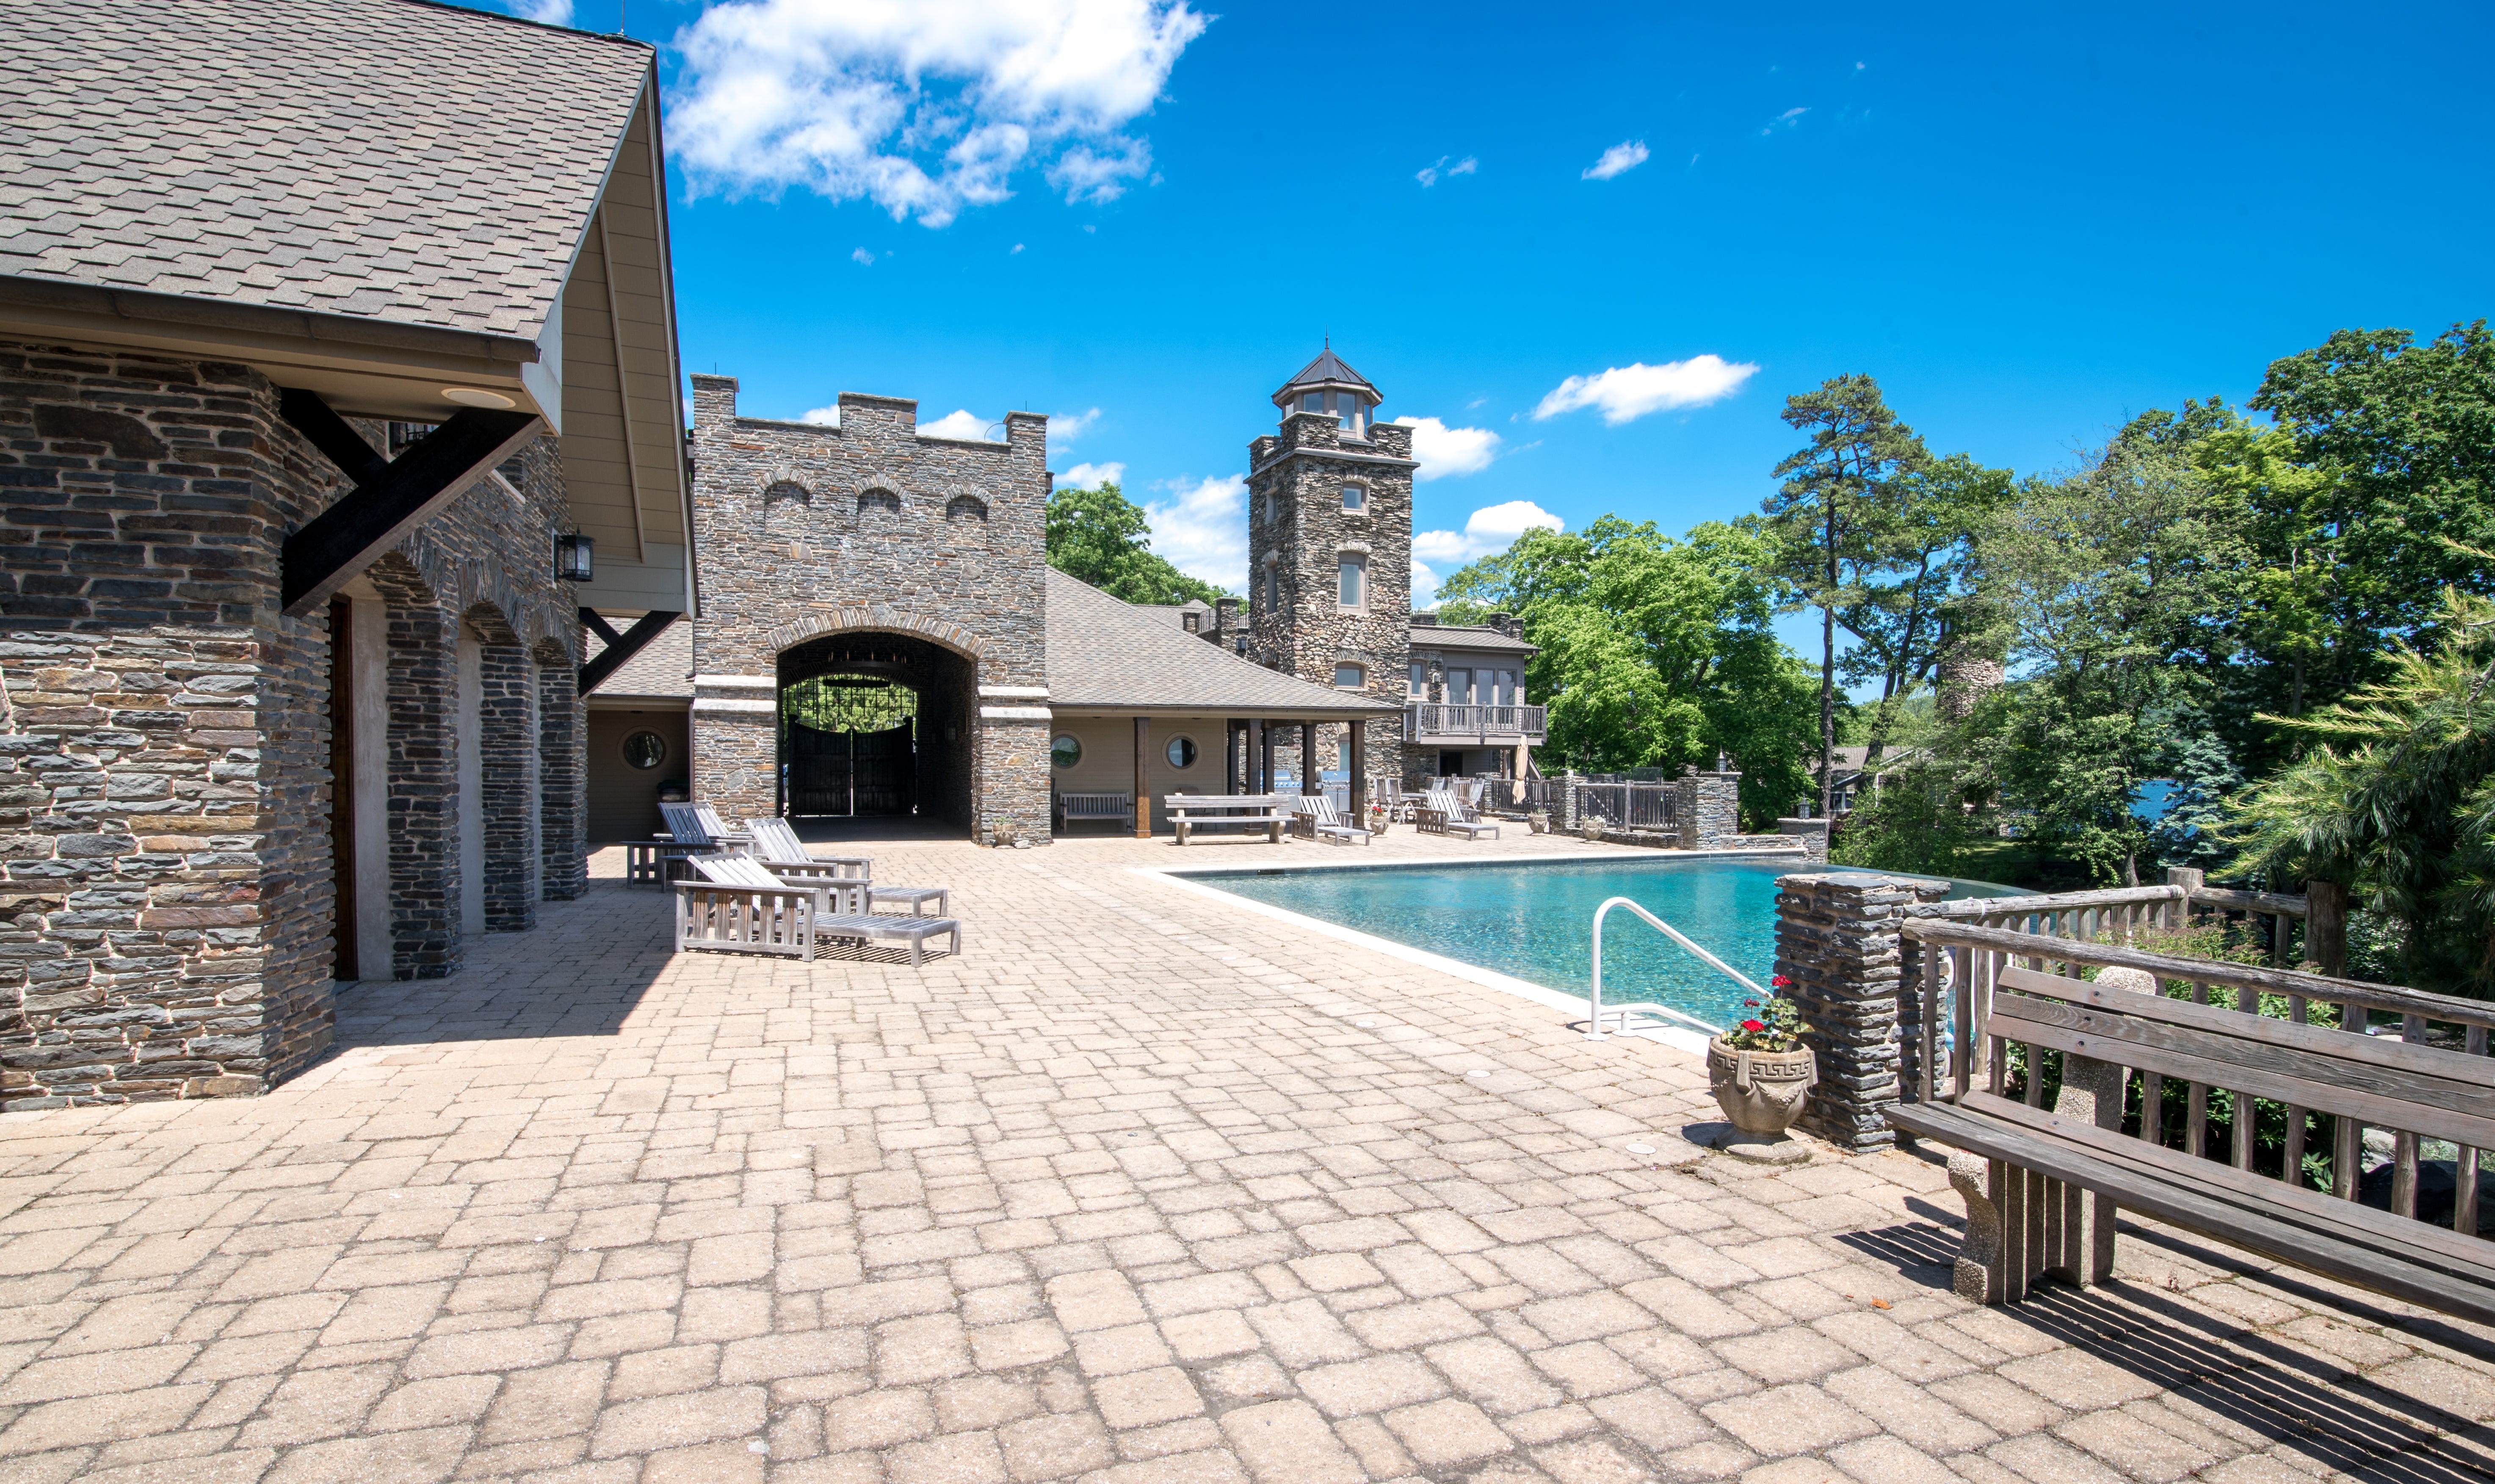 Derek Jeter's Greenwood Lake mansion is under contract. Here's what new owners will enjoy